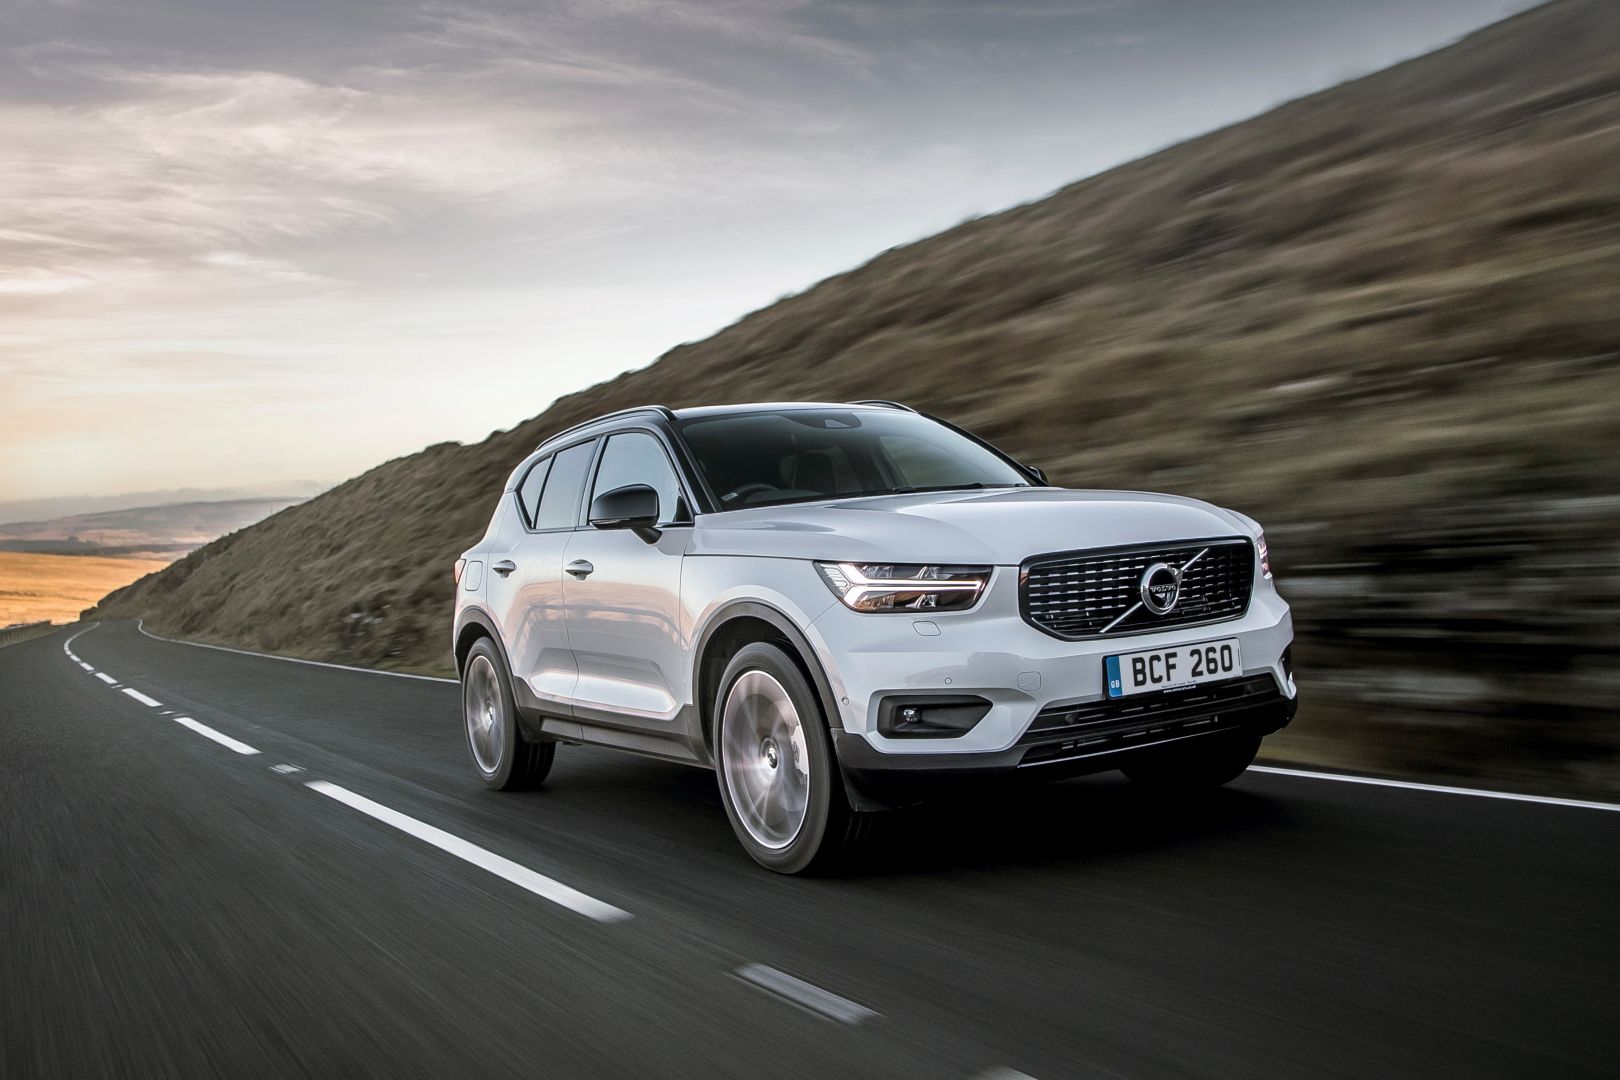 The Volvo XC40 won the Best Car to Tow title at the Auto Trader New Car Awards at PortalAutomotriz.com